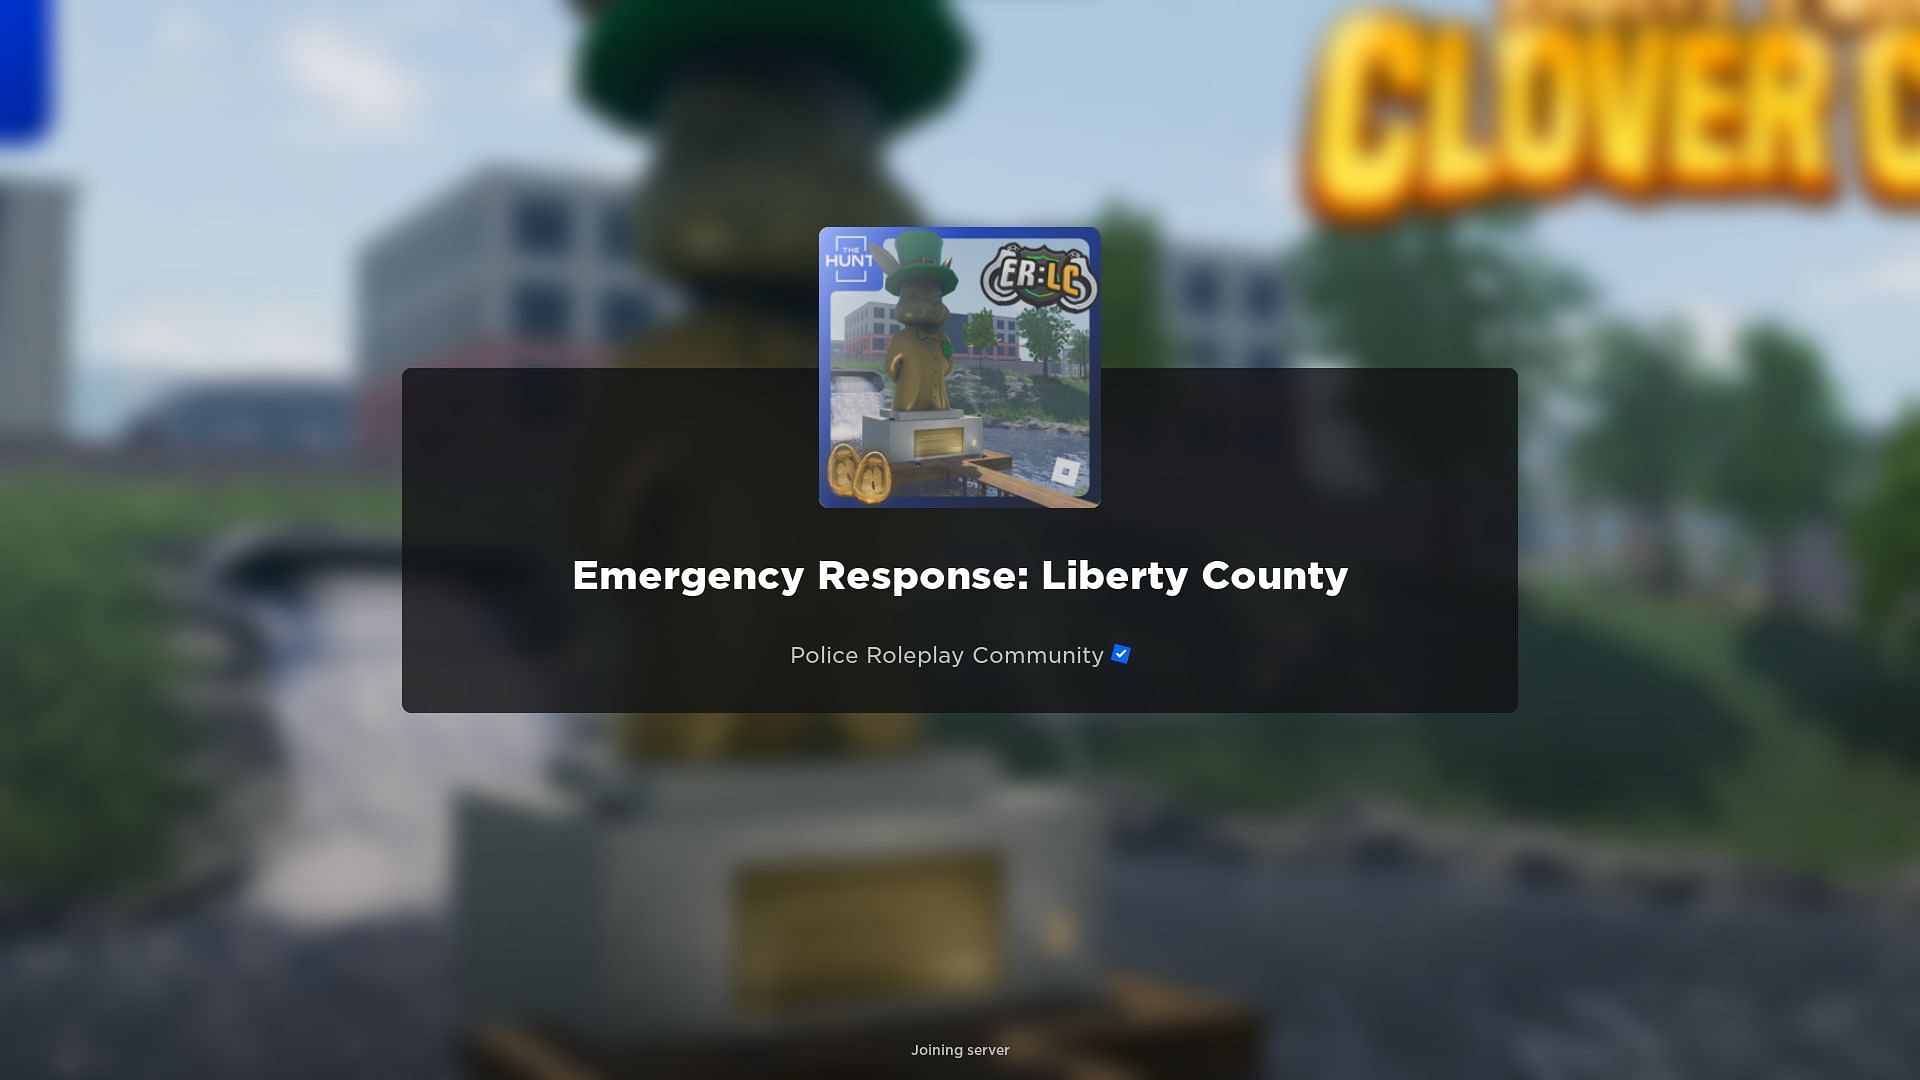 The hunt in Emergency Response: Liberty County